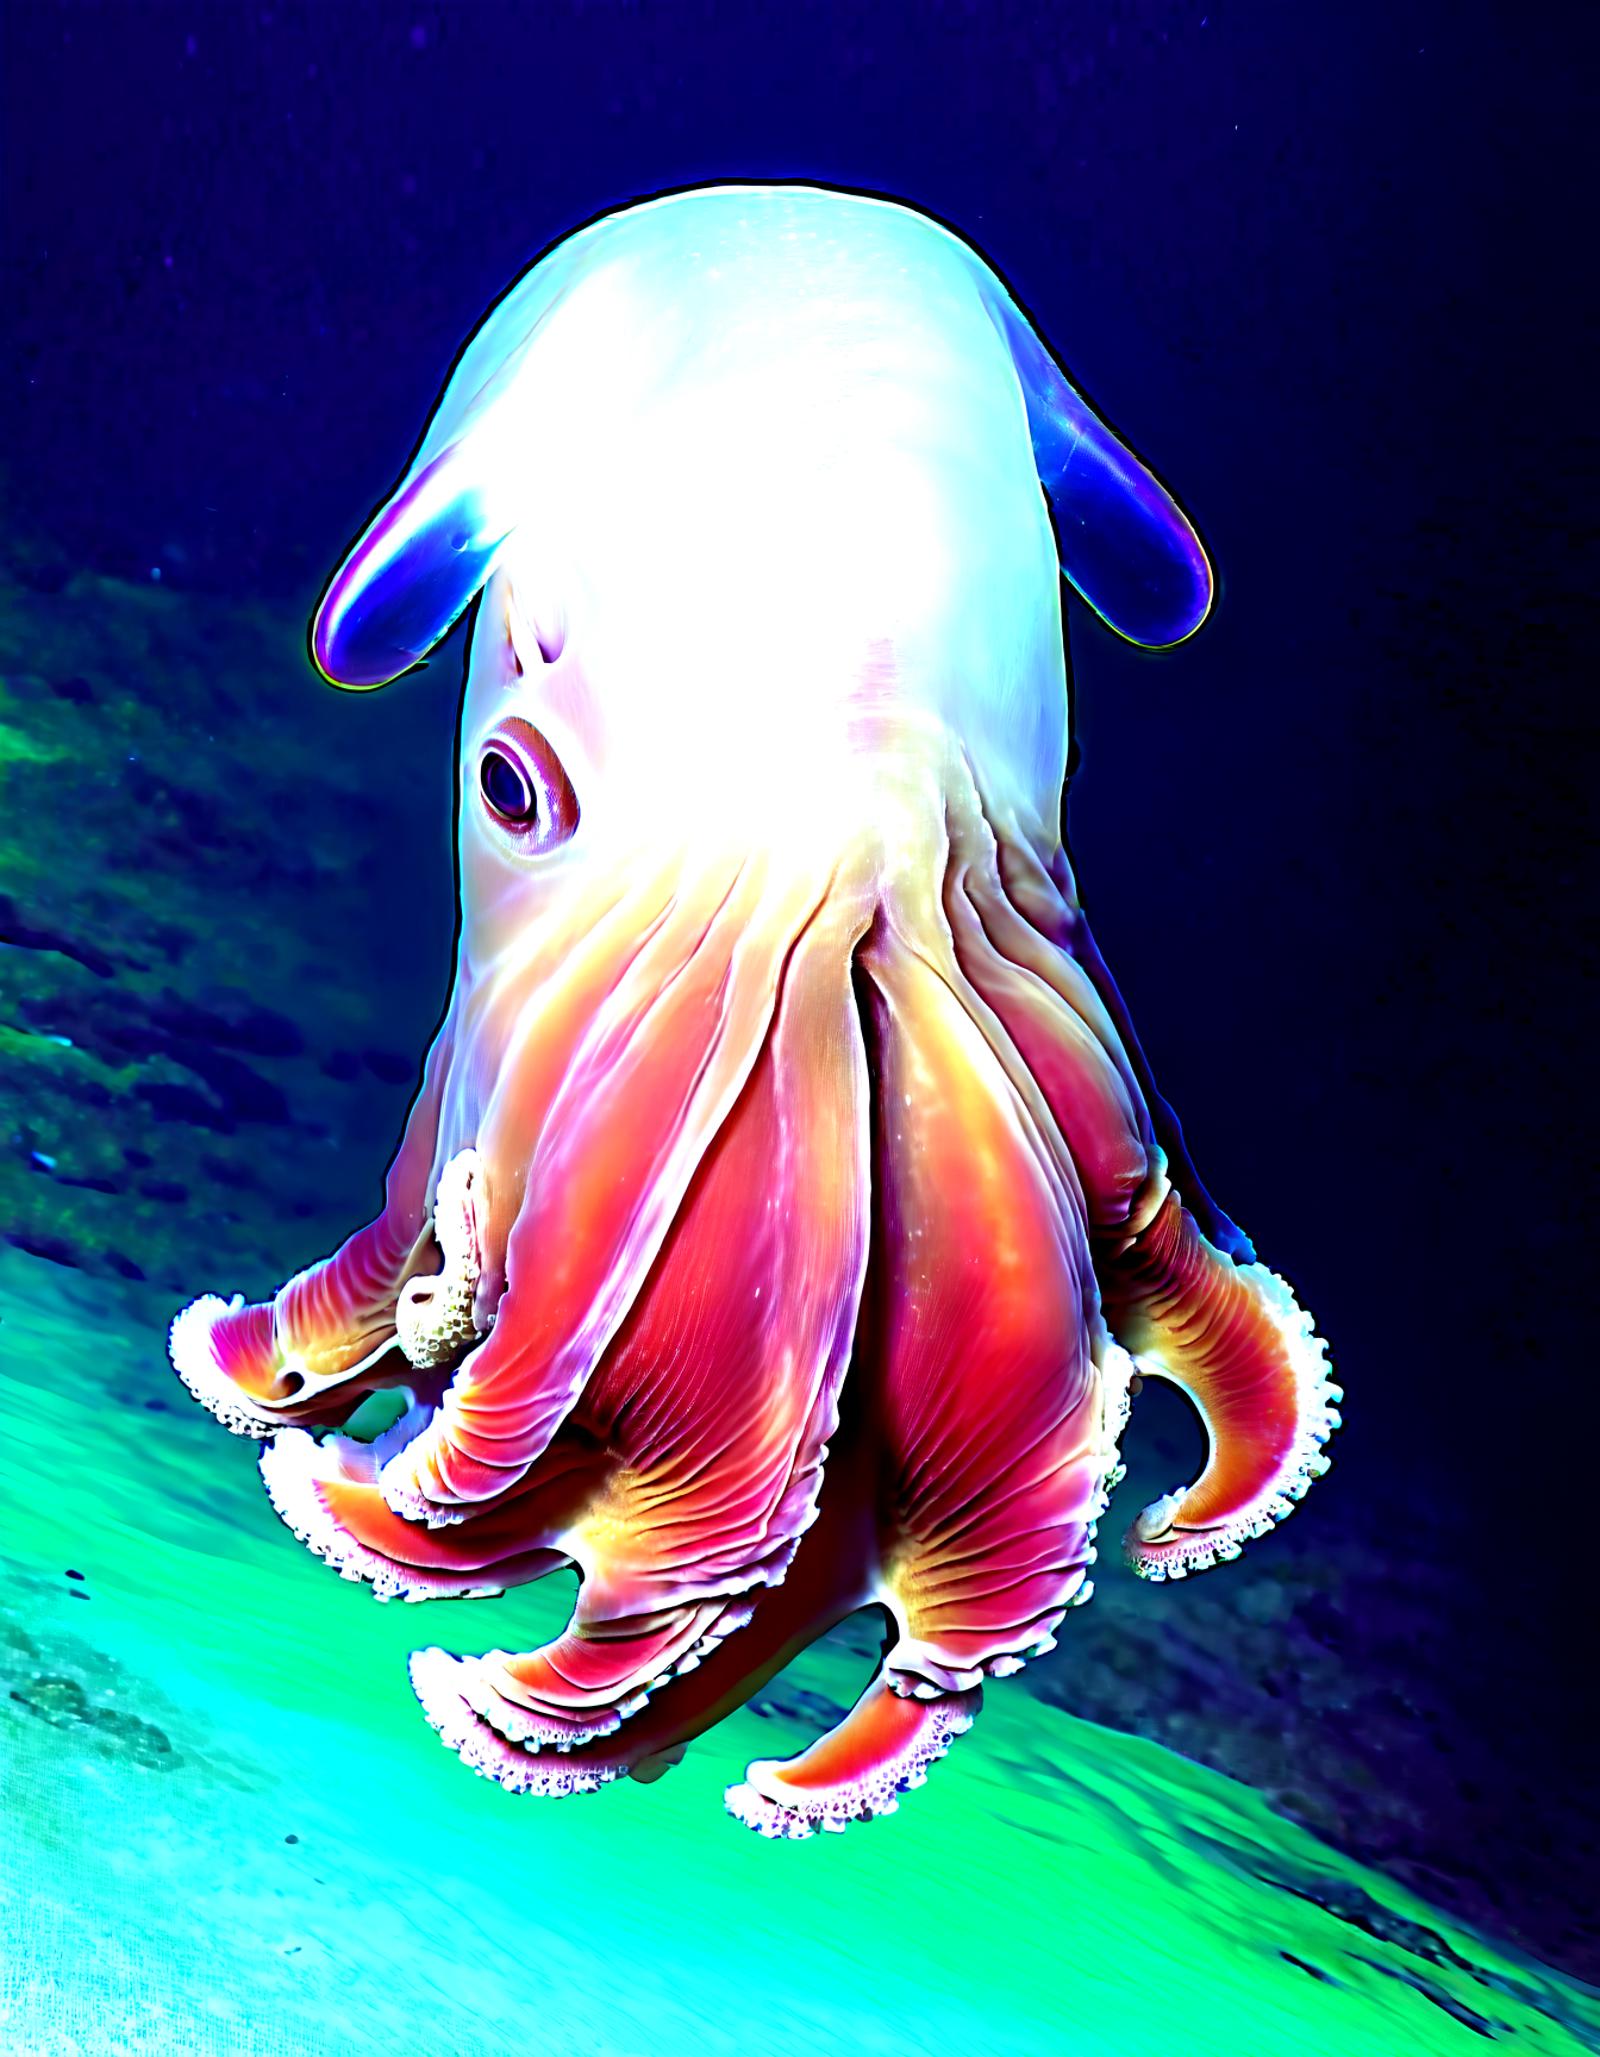 Dumbo Octopus (Grimpoteuthis) [SDXL] image by denrakeiw